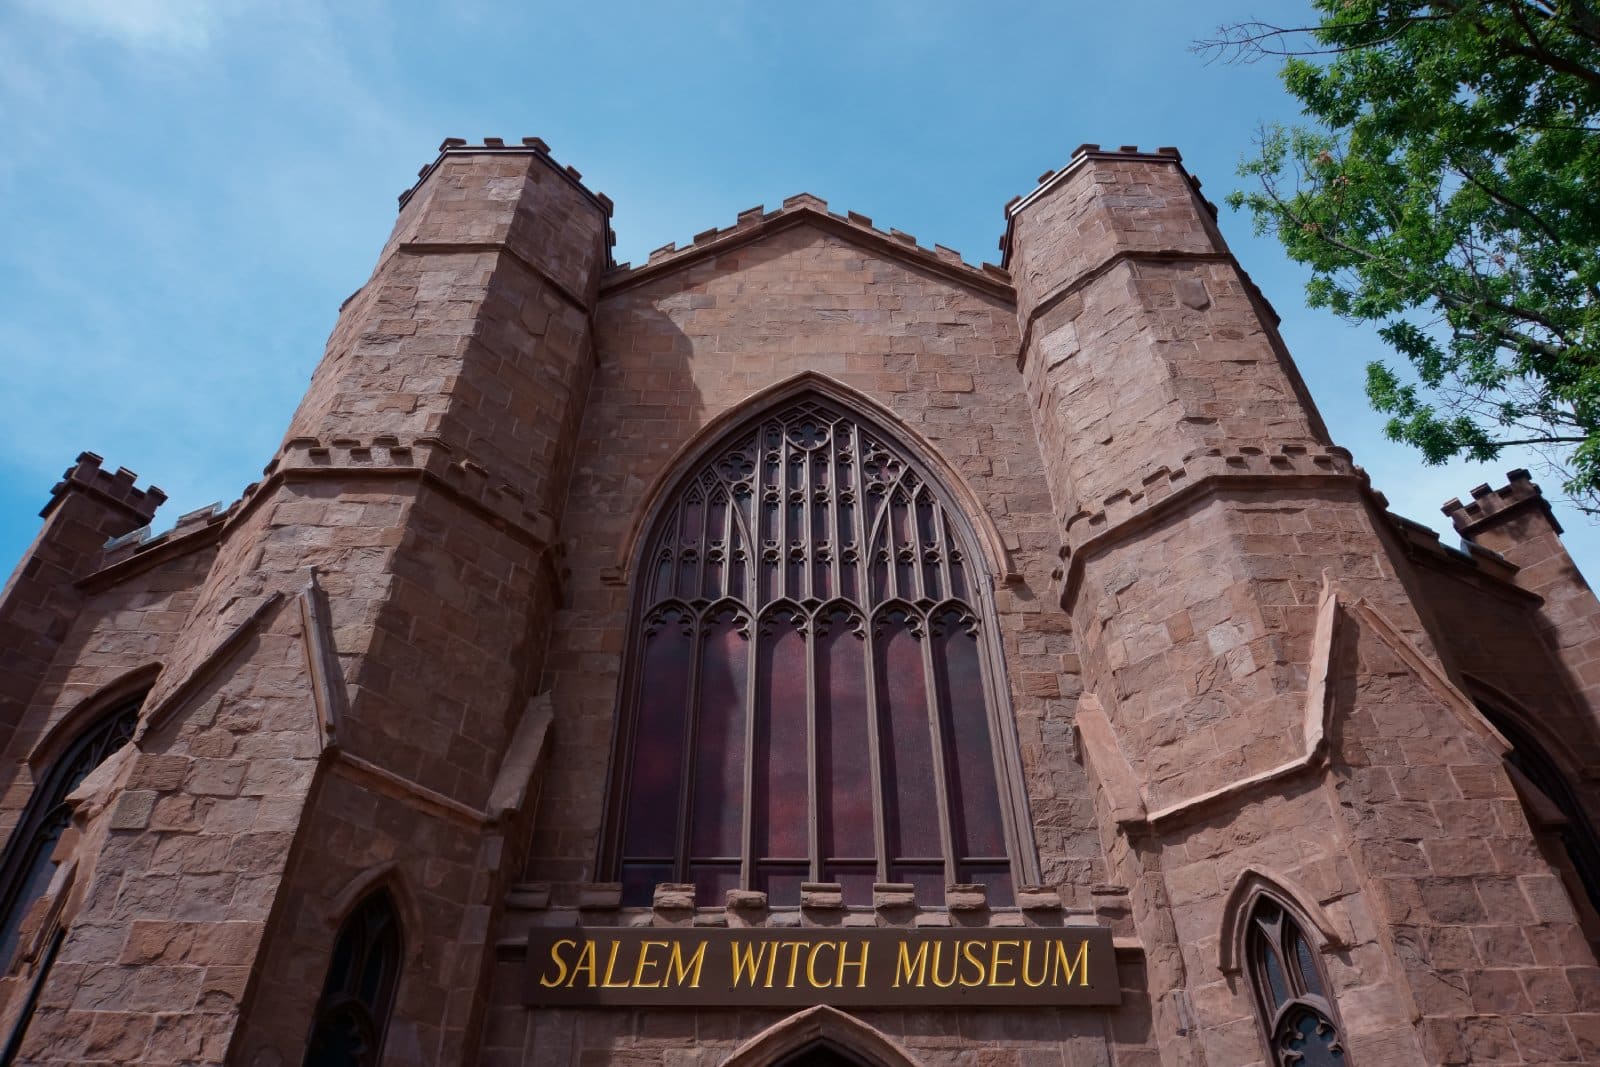 Image Credit: Shutterstock / Yingna Cai <p><span>Uncover the history of the Salem witch trials. It’s intriguing and educational, but the dark subject matter may spook younger children. The gift shop offers unique, albeit slightly eerie, souvenirs.</span></p>